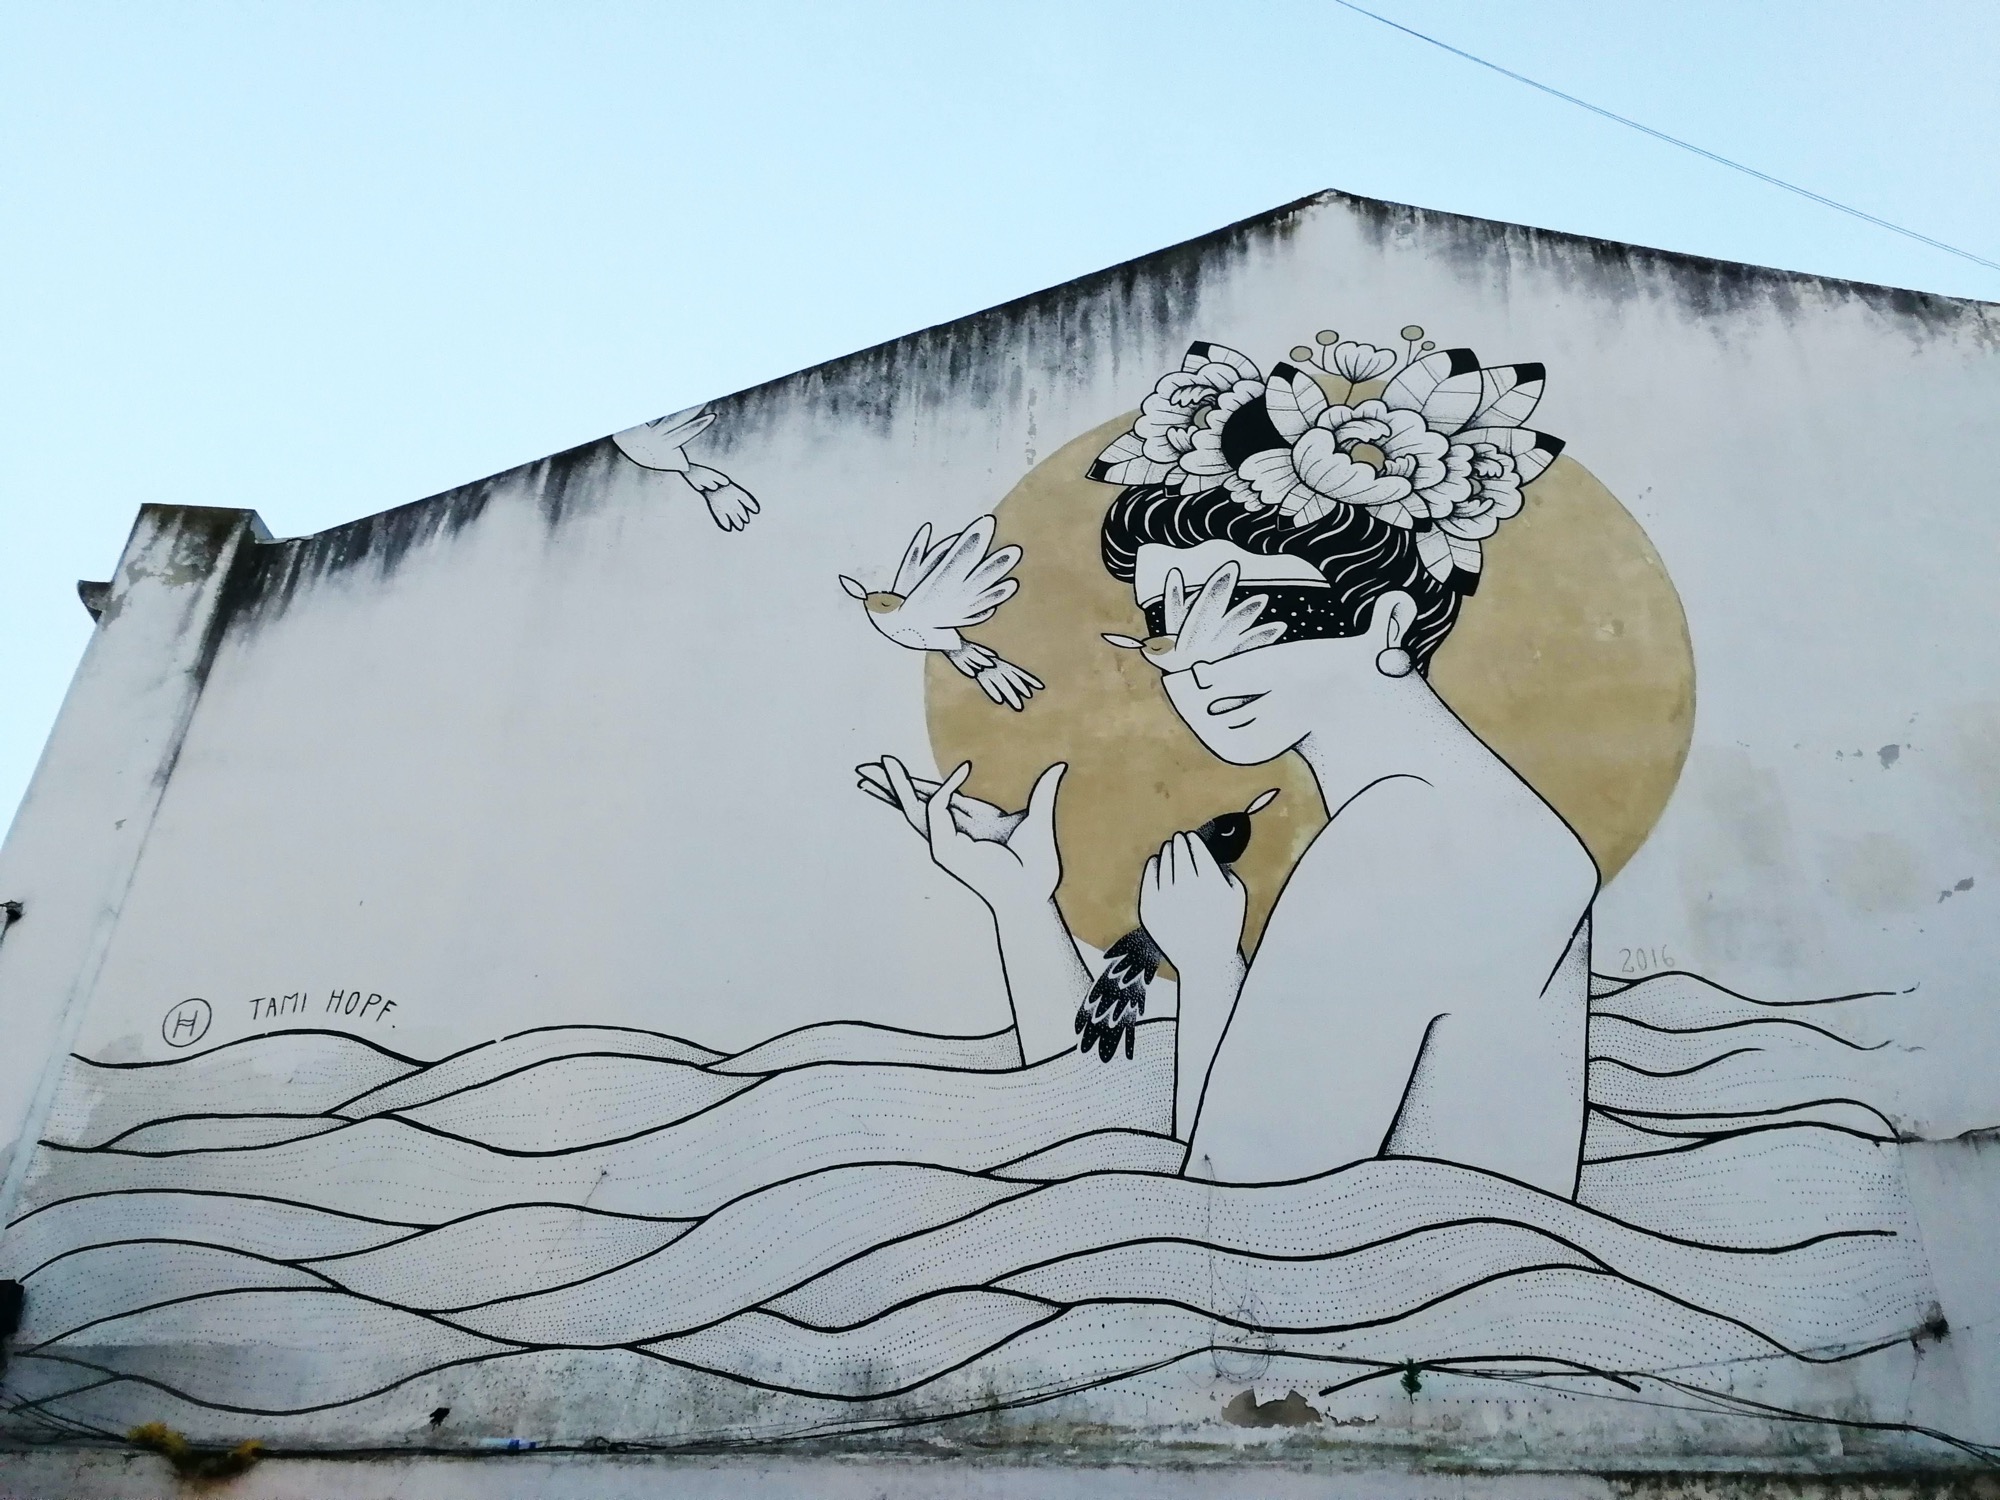 Graffiti 940  by the artist Tami Hopf captured by Rabot in Lisboa Portugal